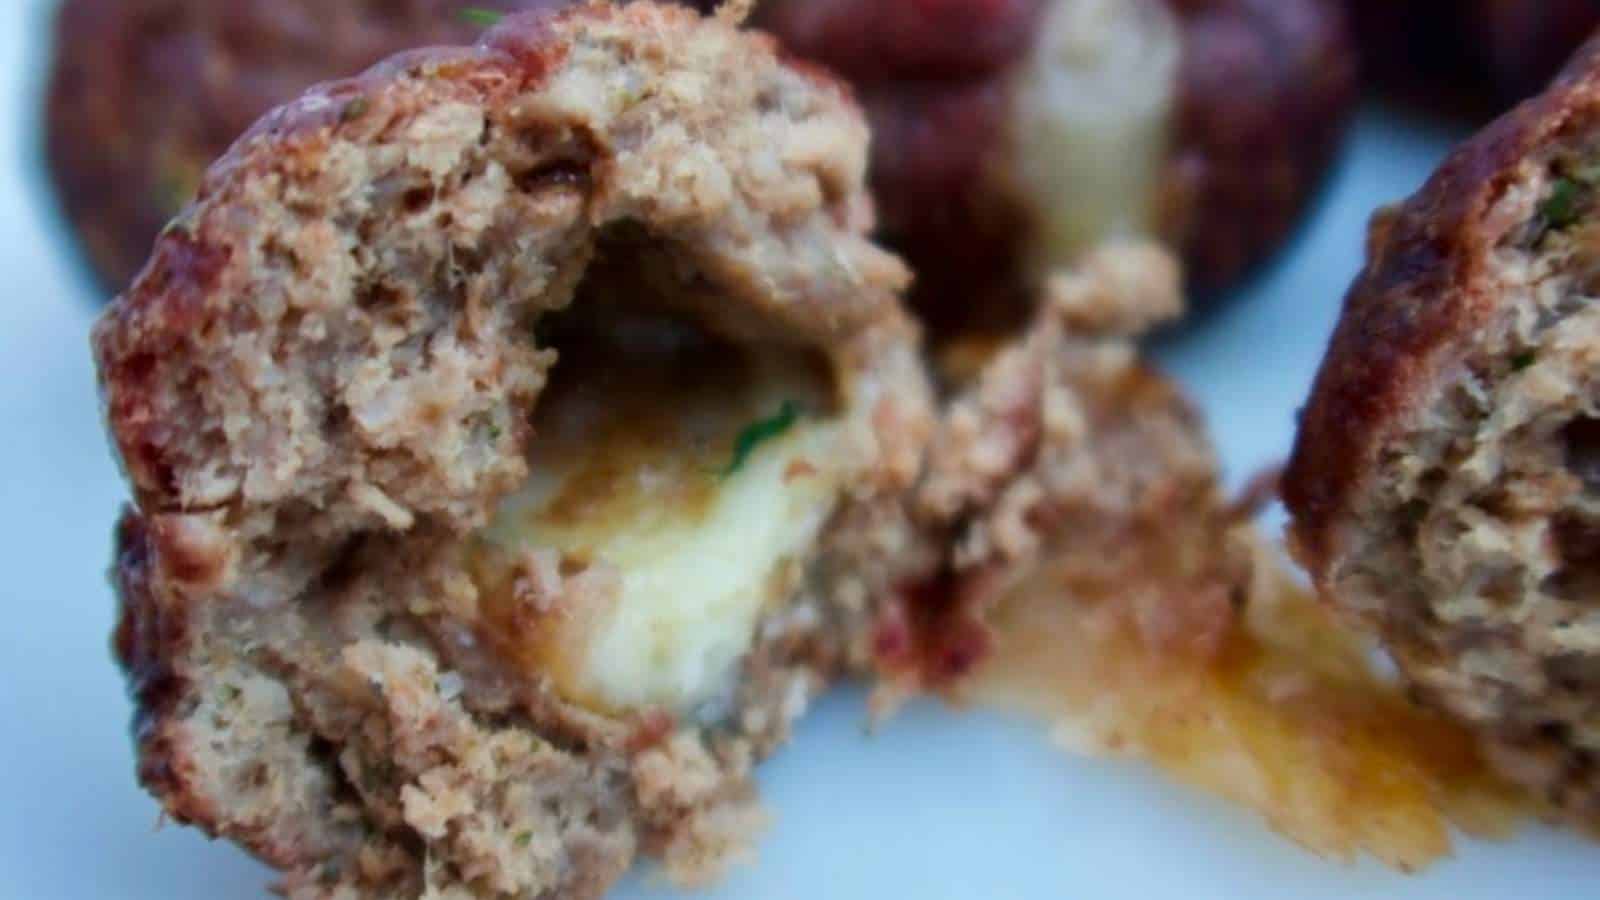 Meatballs with cheese on a plate.